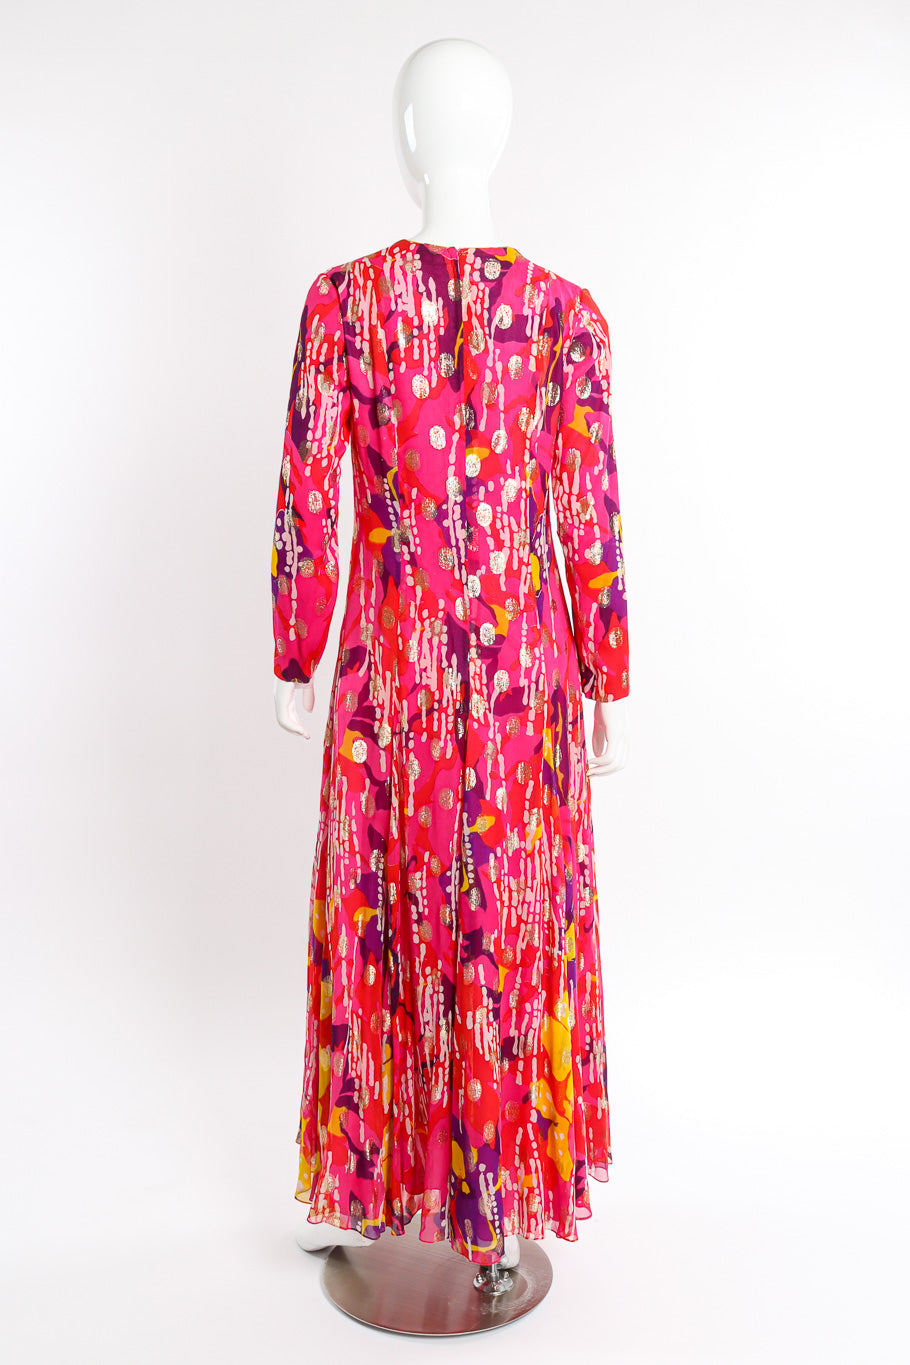 Vintage Doreen Loh Abstract Floral Print Maxi Dress back side view on mannequin @Recessla